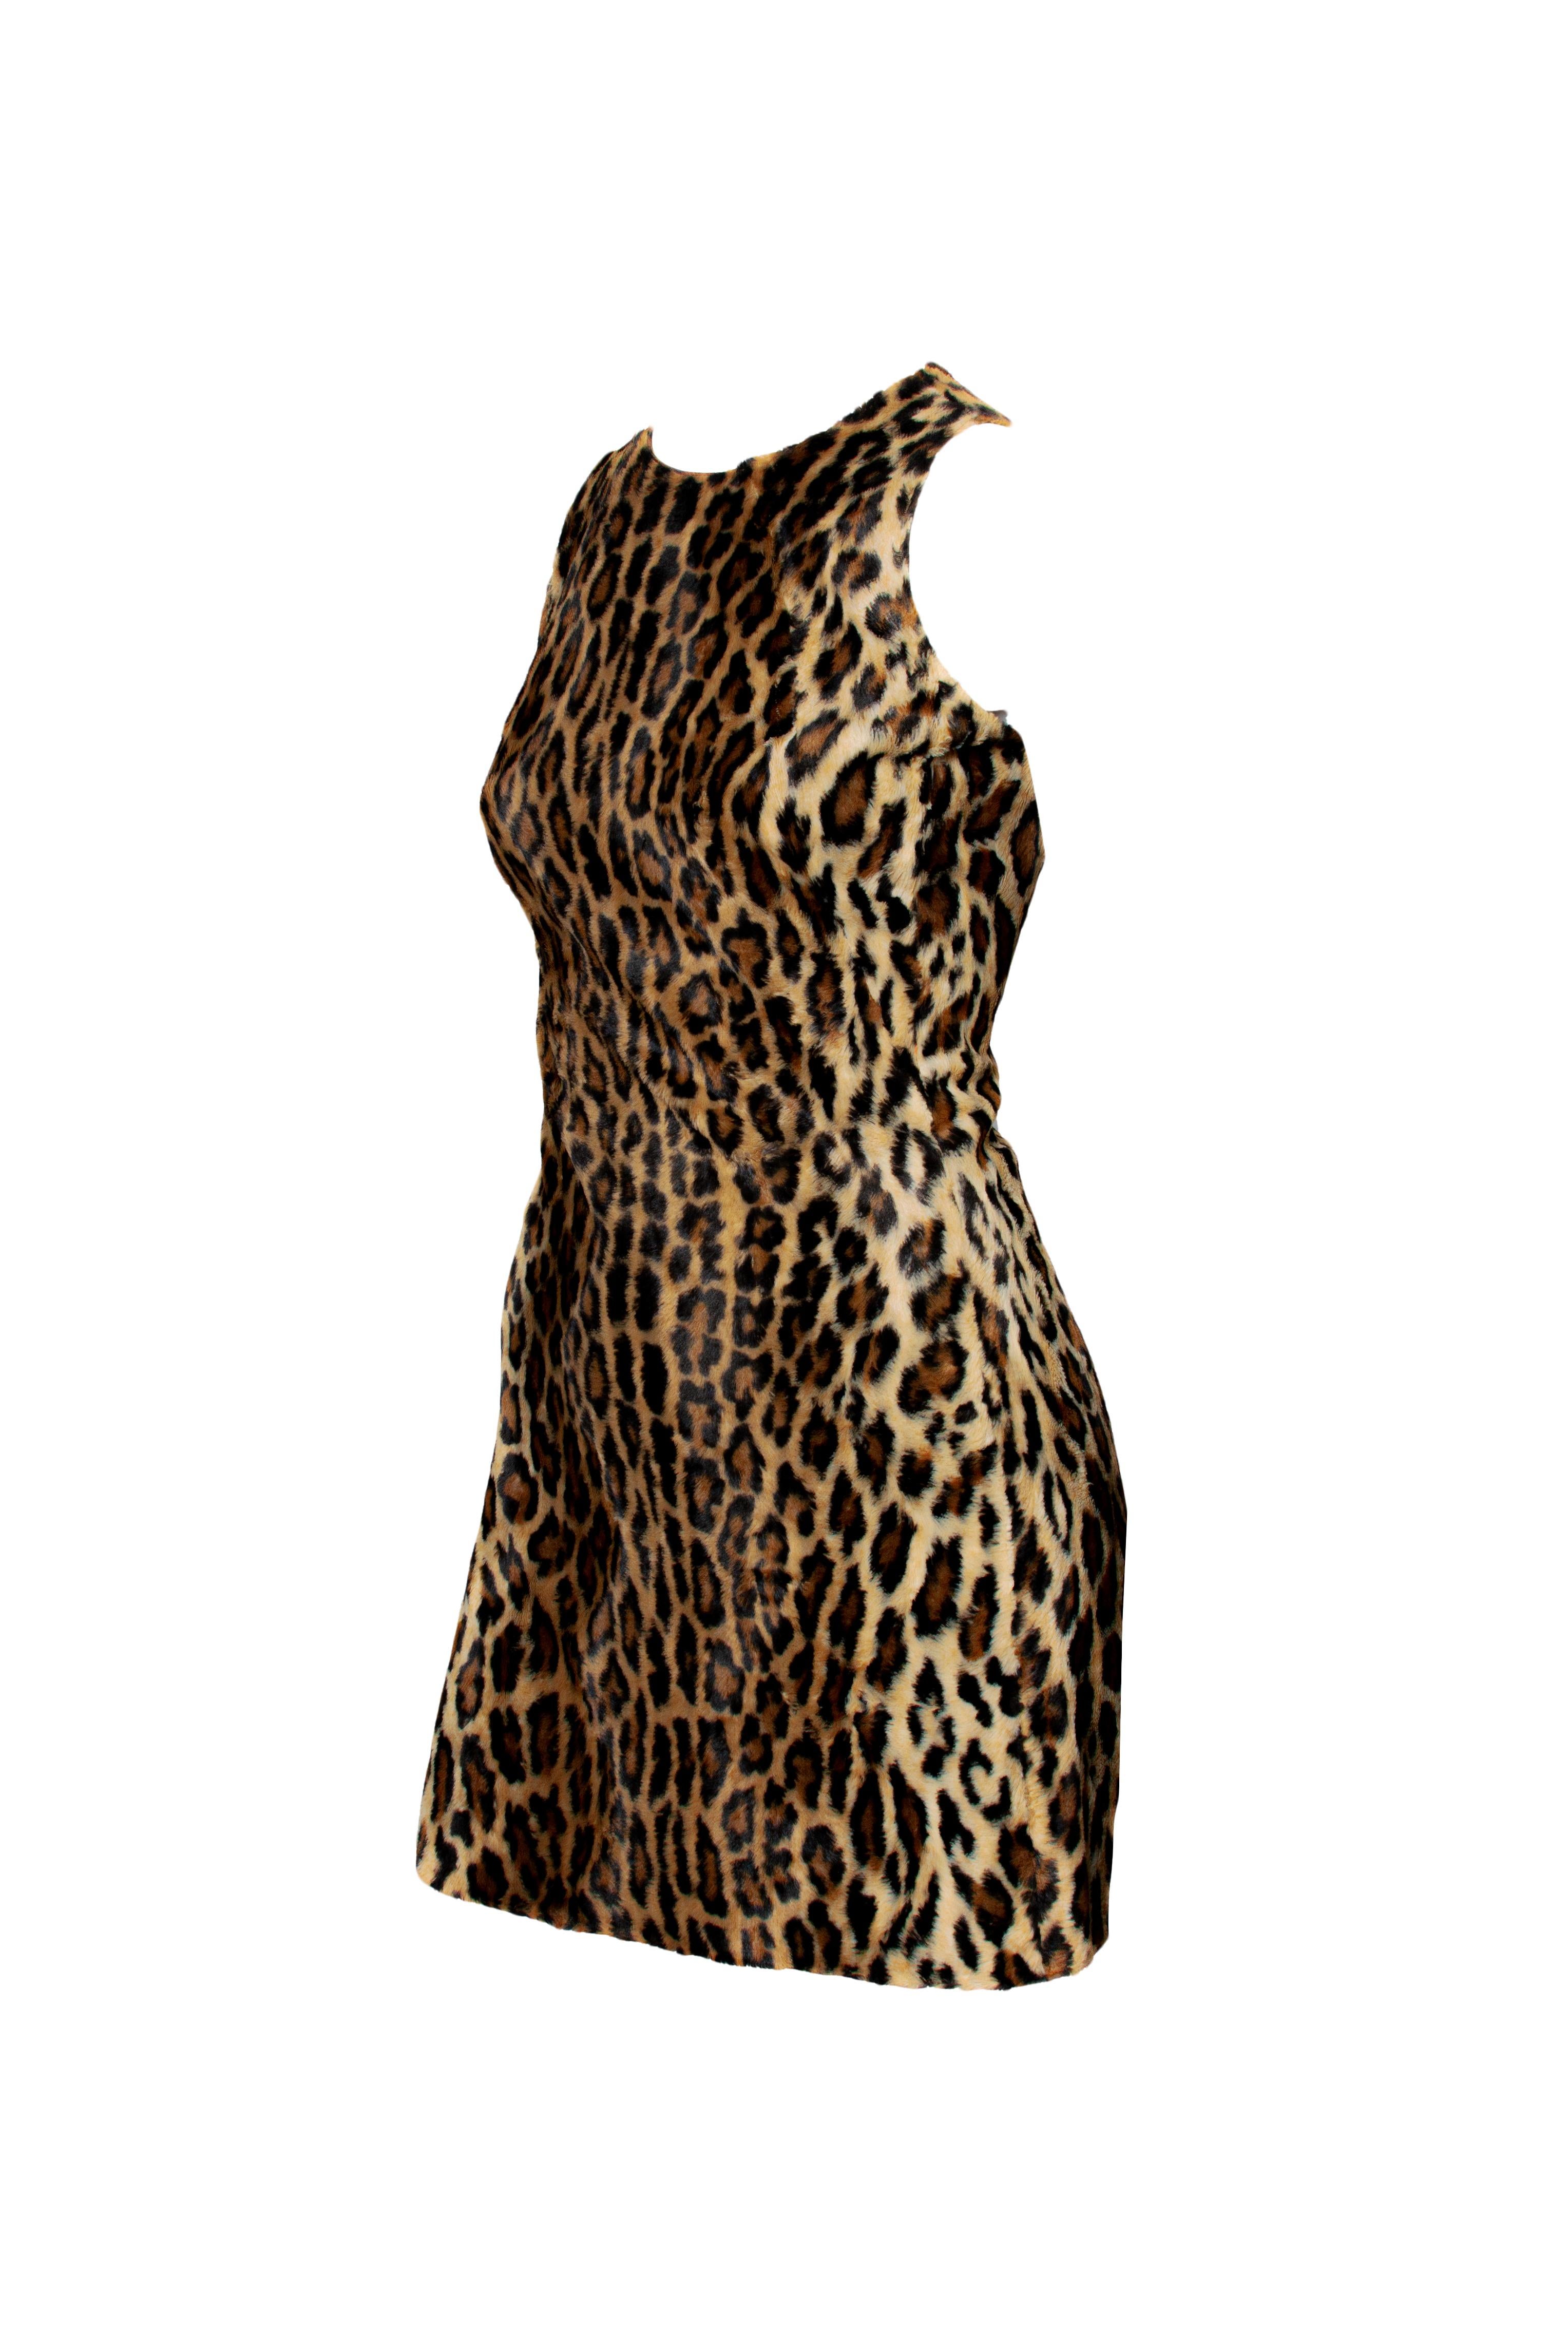 Presenting This dress was featured in the 1994 ad campaign and covered in a faux fur cheetah print. This faux cheetah pattern is also featured on the F/W 1994 runway. Constructed of cotton and viscose, this design by Gianni Versace is the perfect